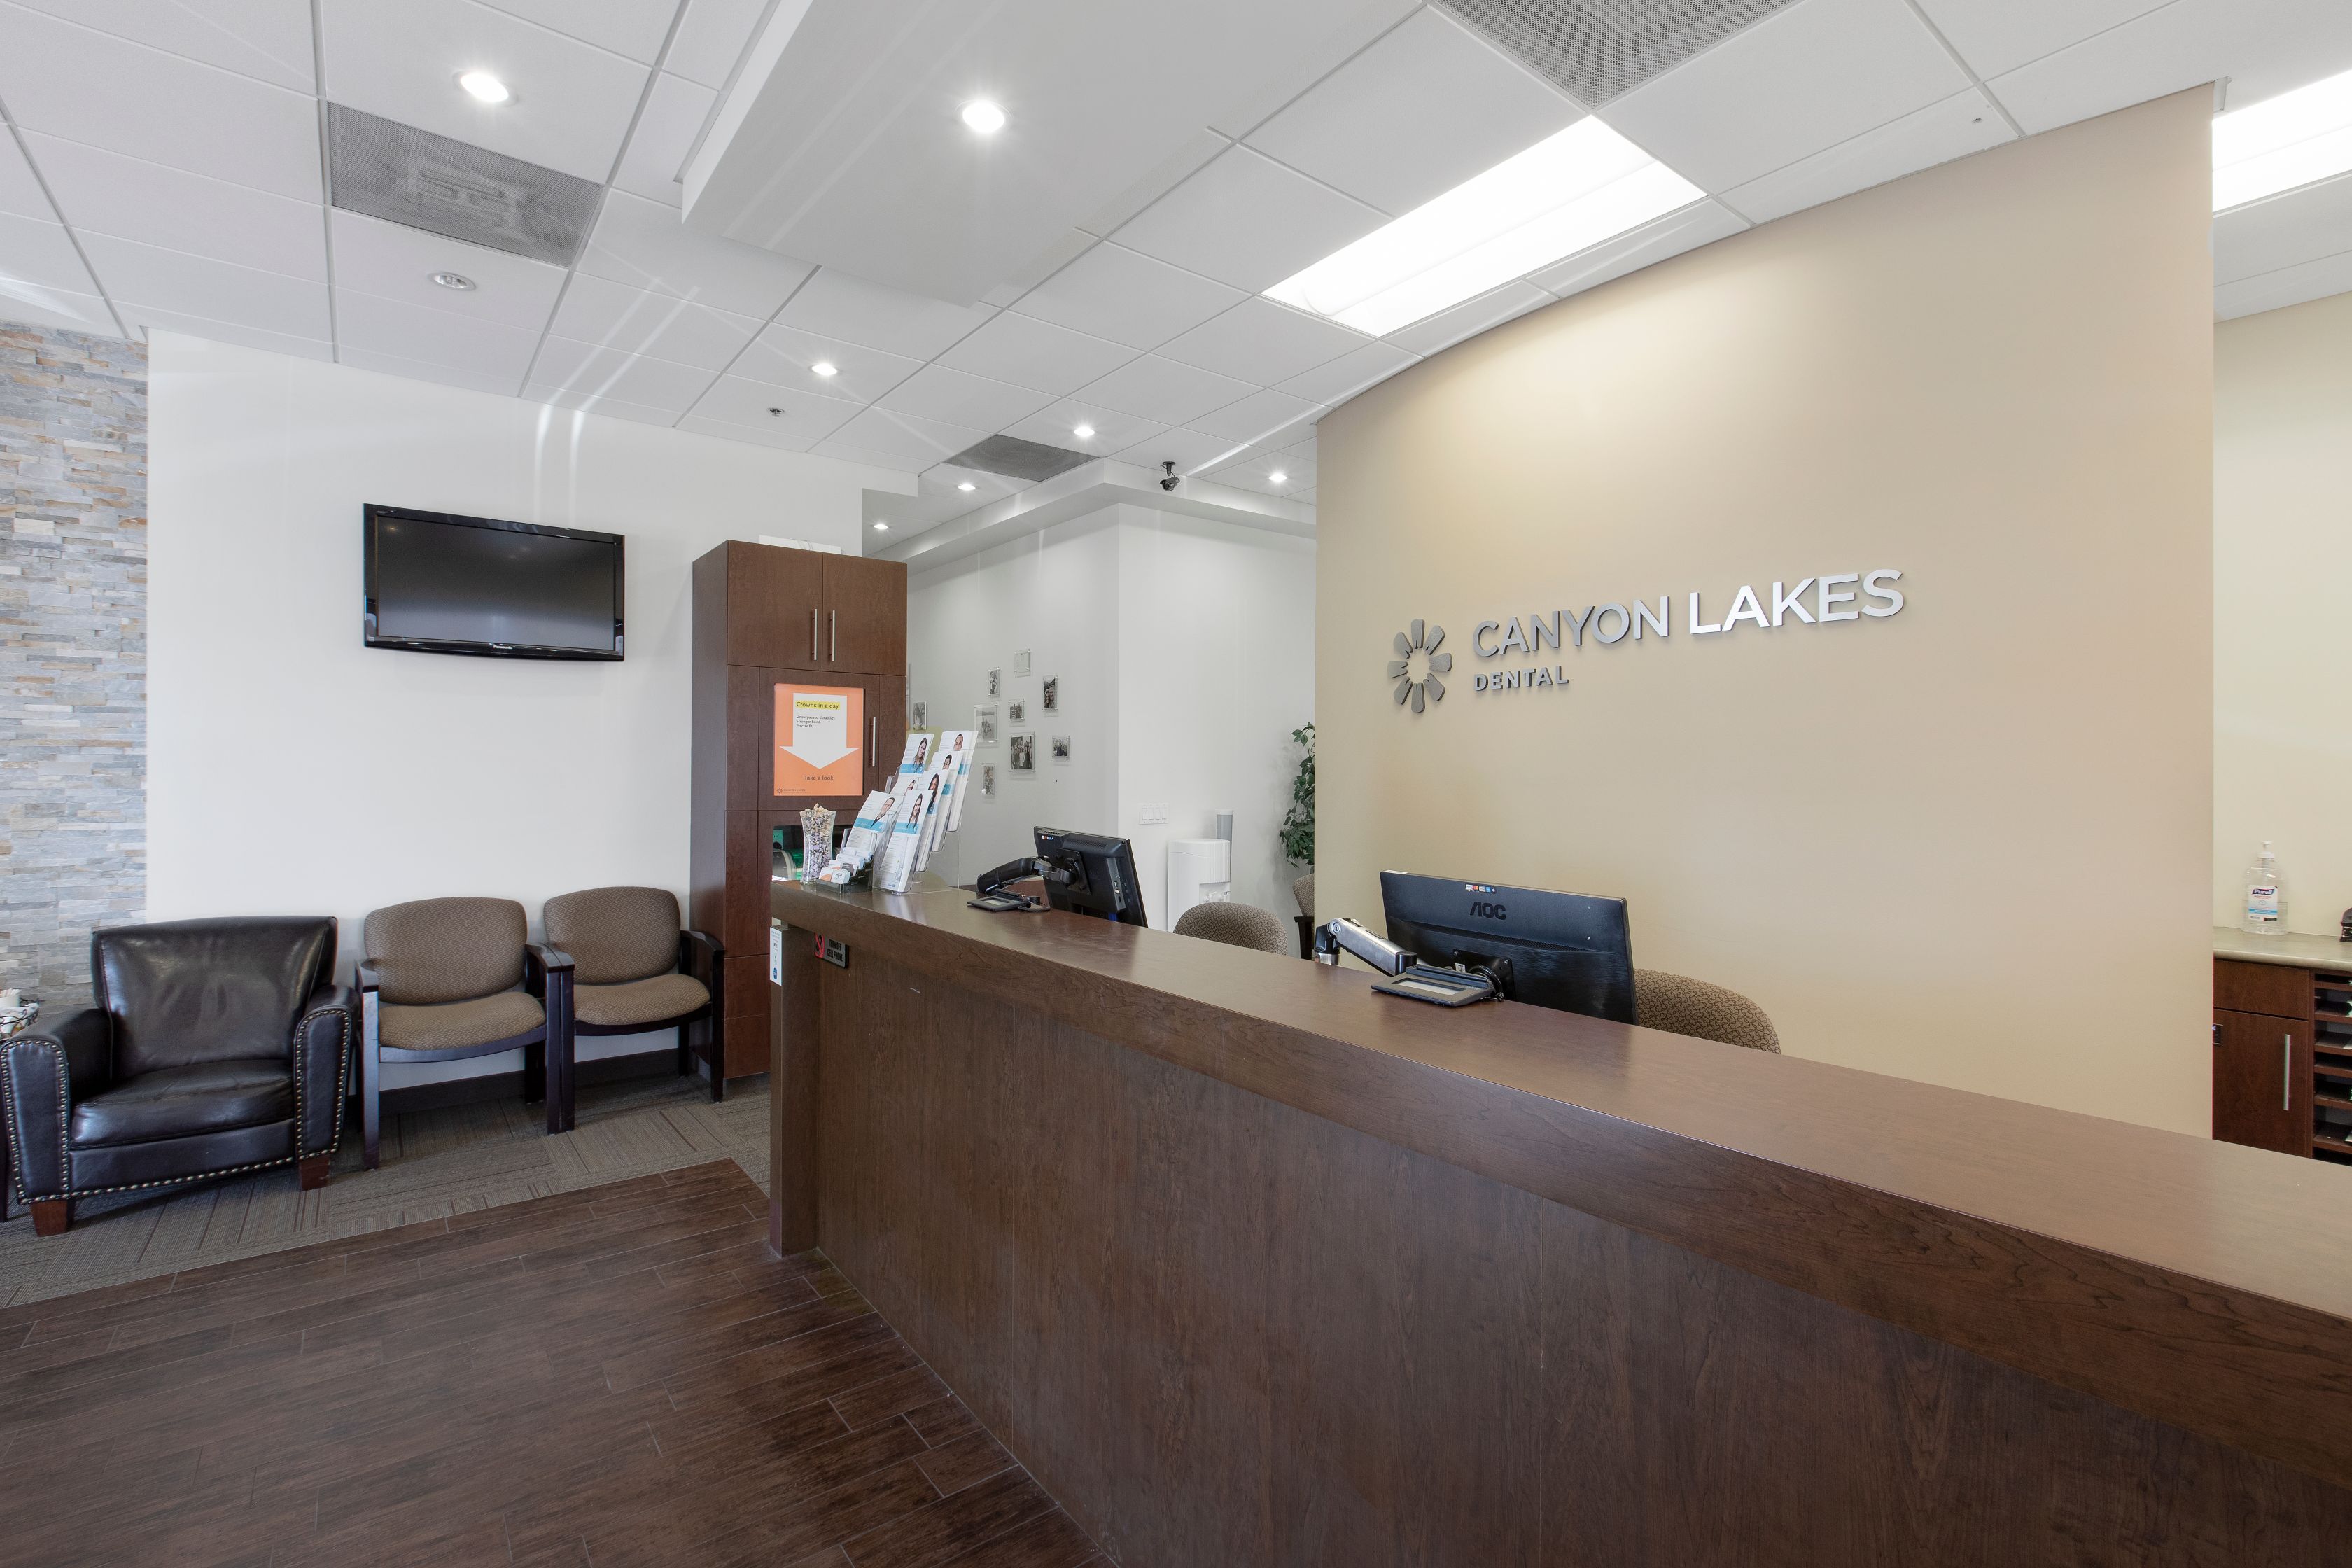 Canyon Lakes Dental Group and Orthodontics opened its doors to the Mesa community in January 2010!